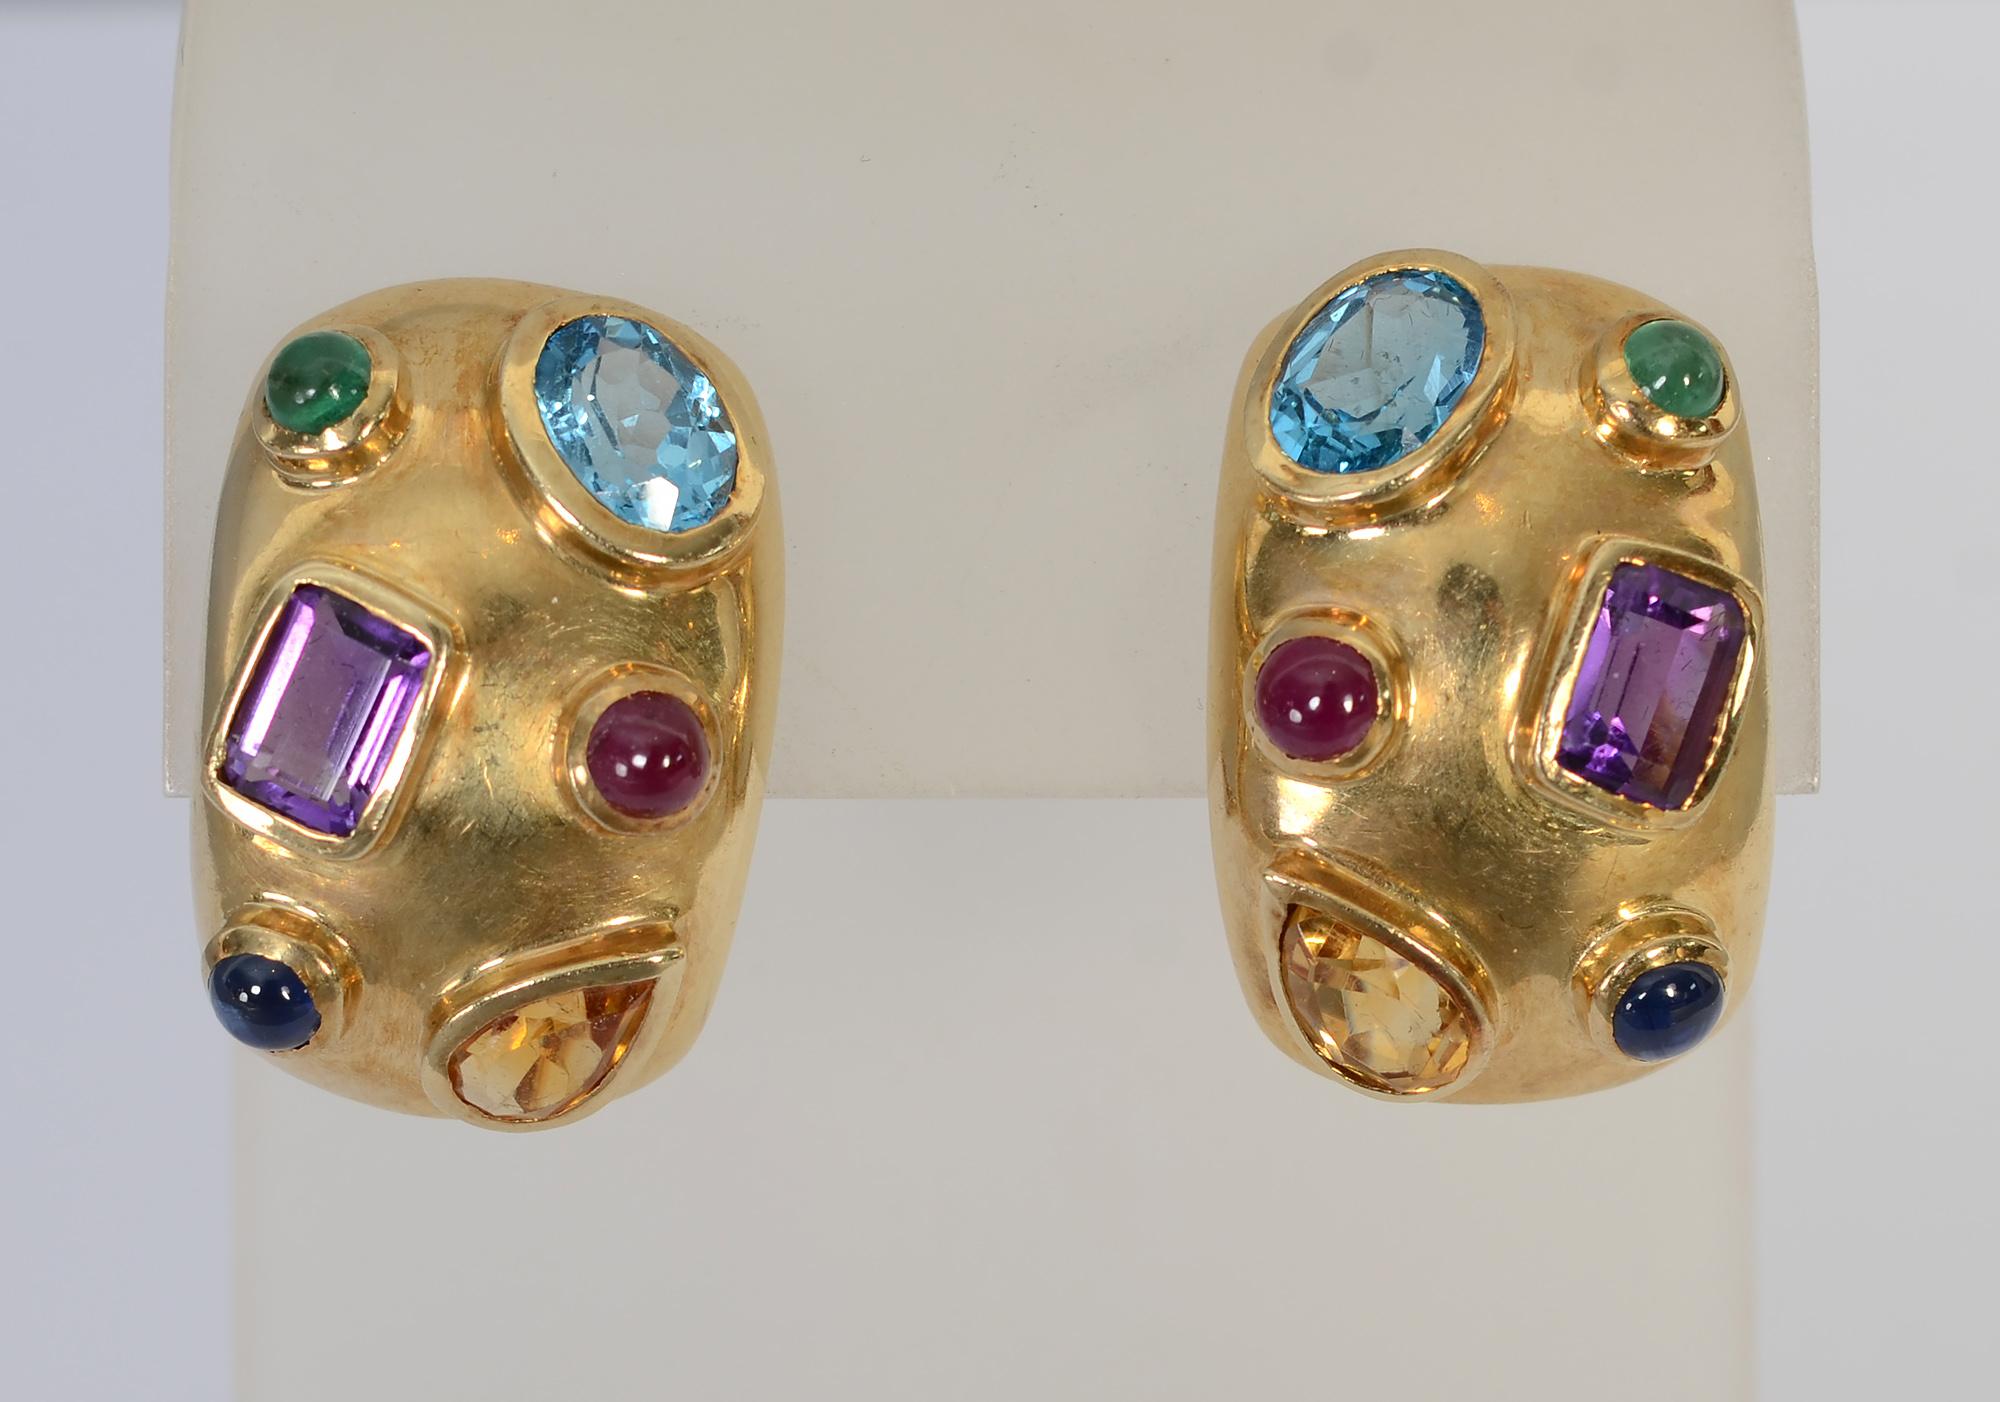 Festive and colorful 14 karat half hoop earrings with stones that include: amethyst; citrine; blue topaz and tourmaline. The stones are a variety of shapes and sizes. Backs are posts and clips. Signed CK.
The earrings are 3/4